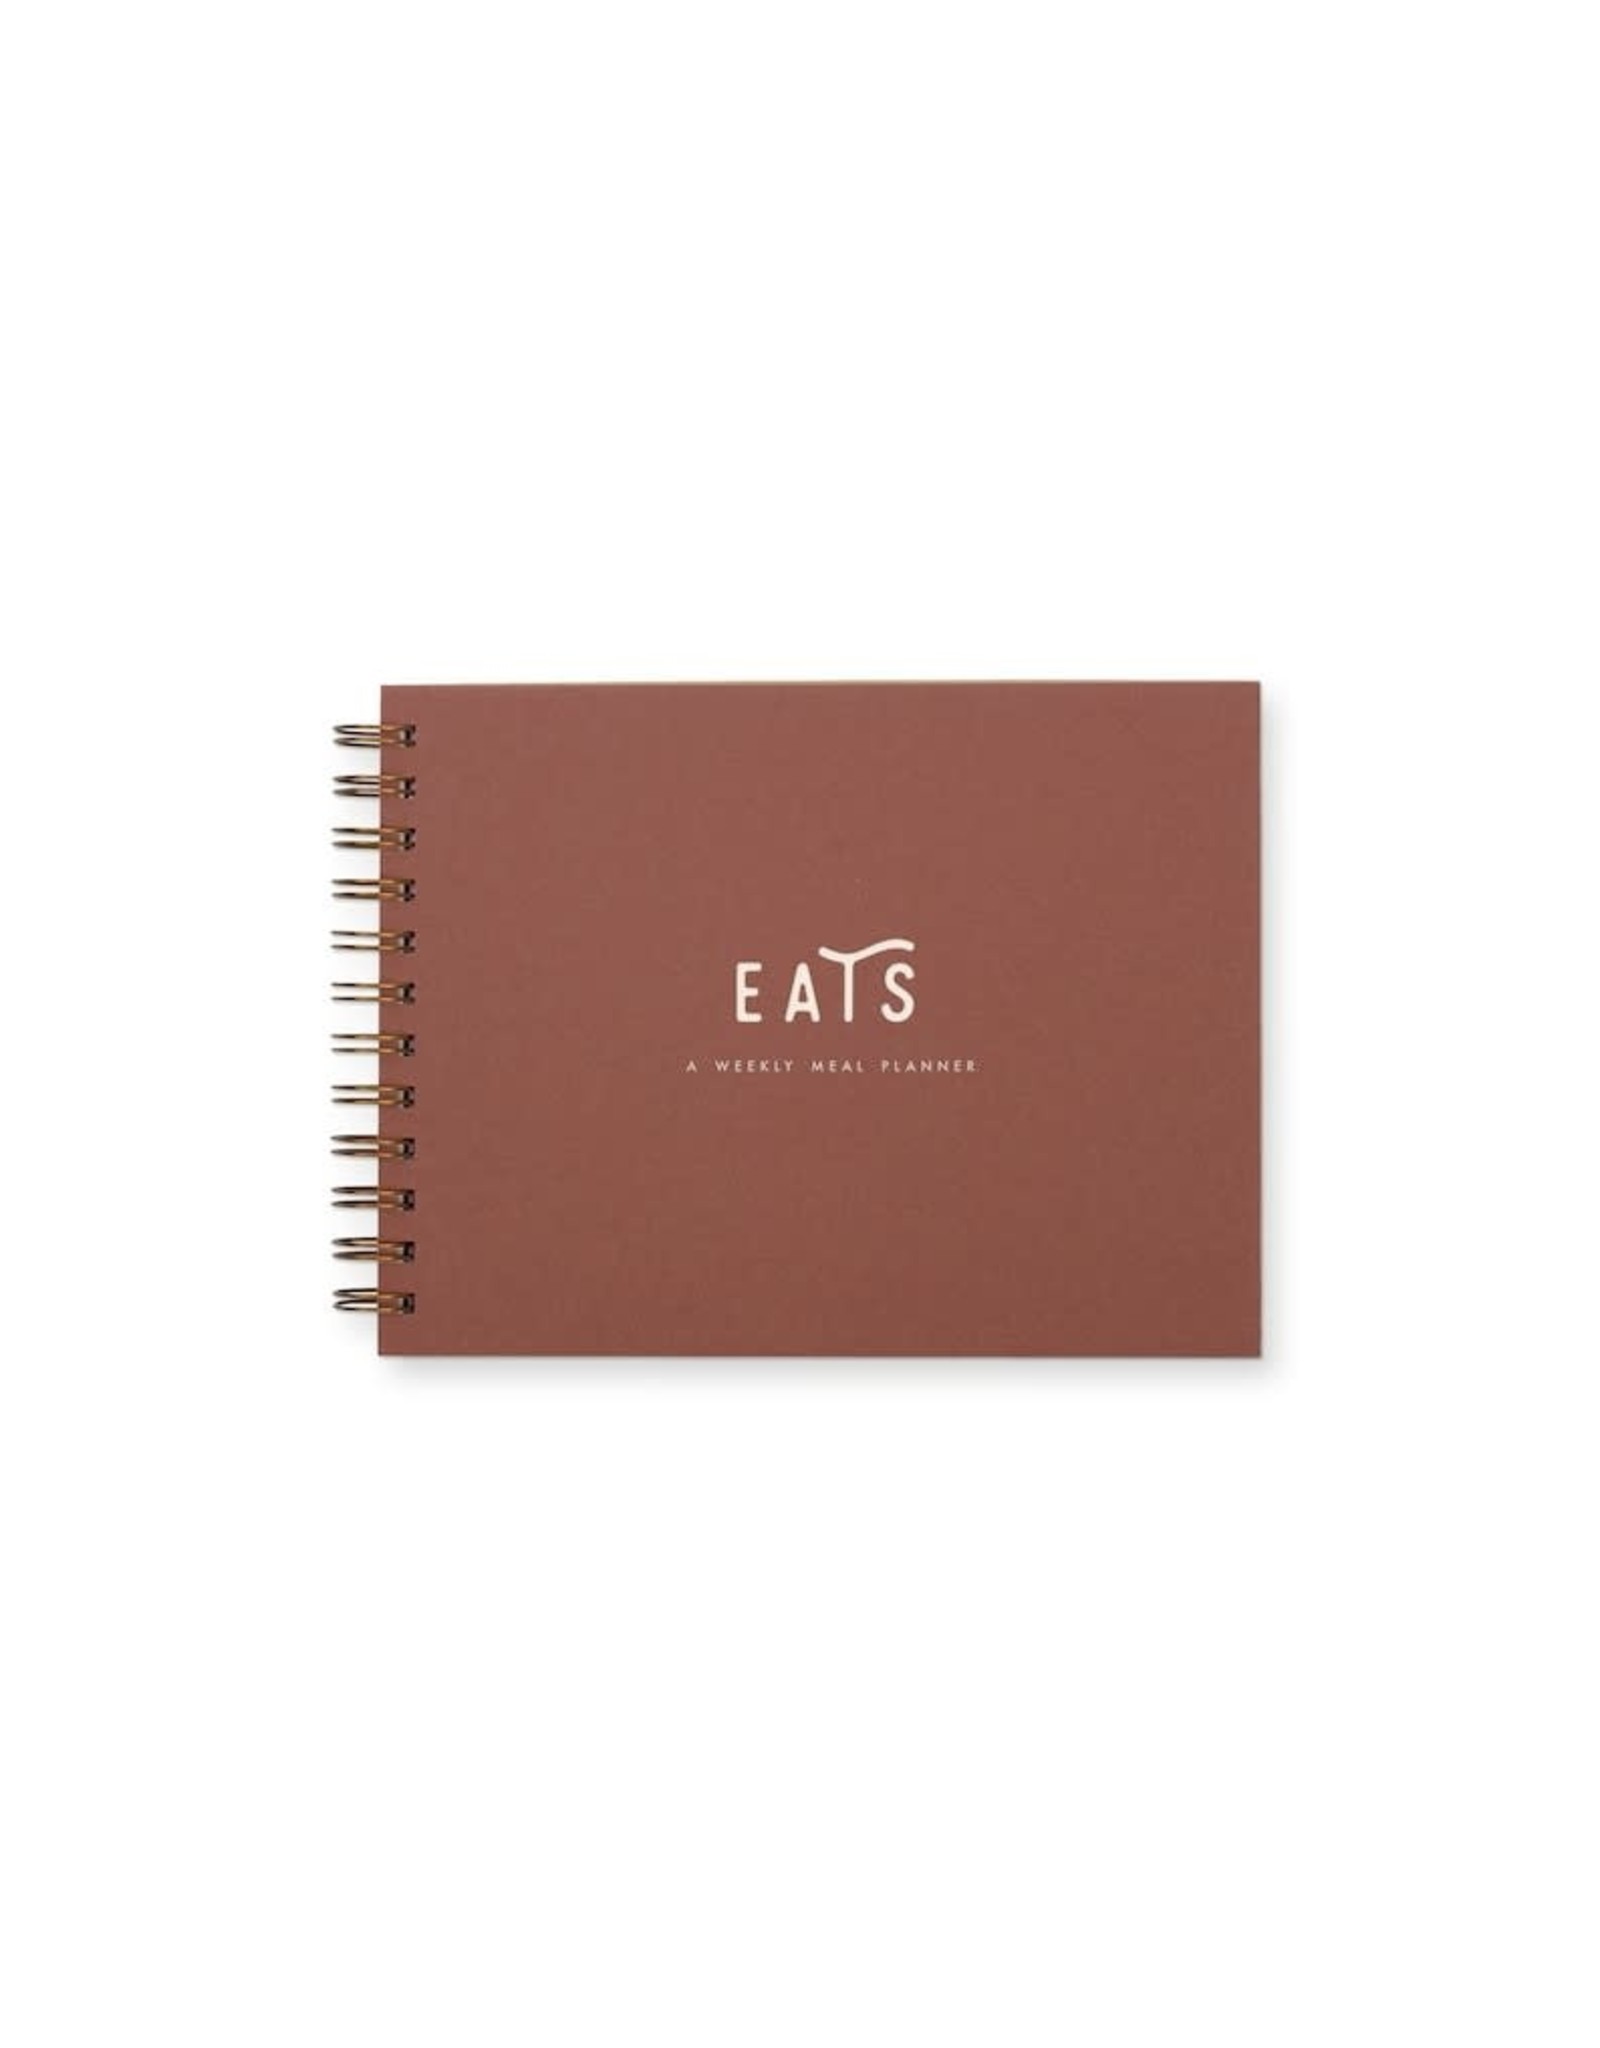 Ruff House Print Shop Simple Meal Planner - Morning Fog